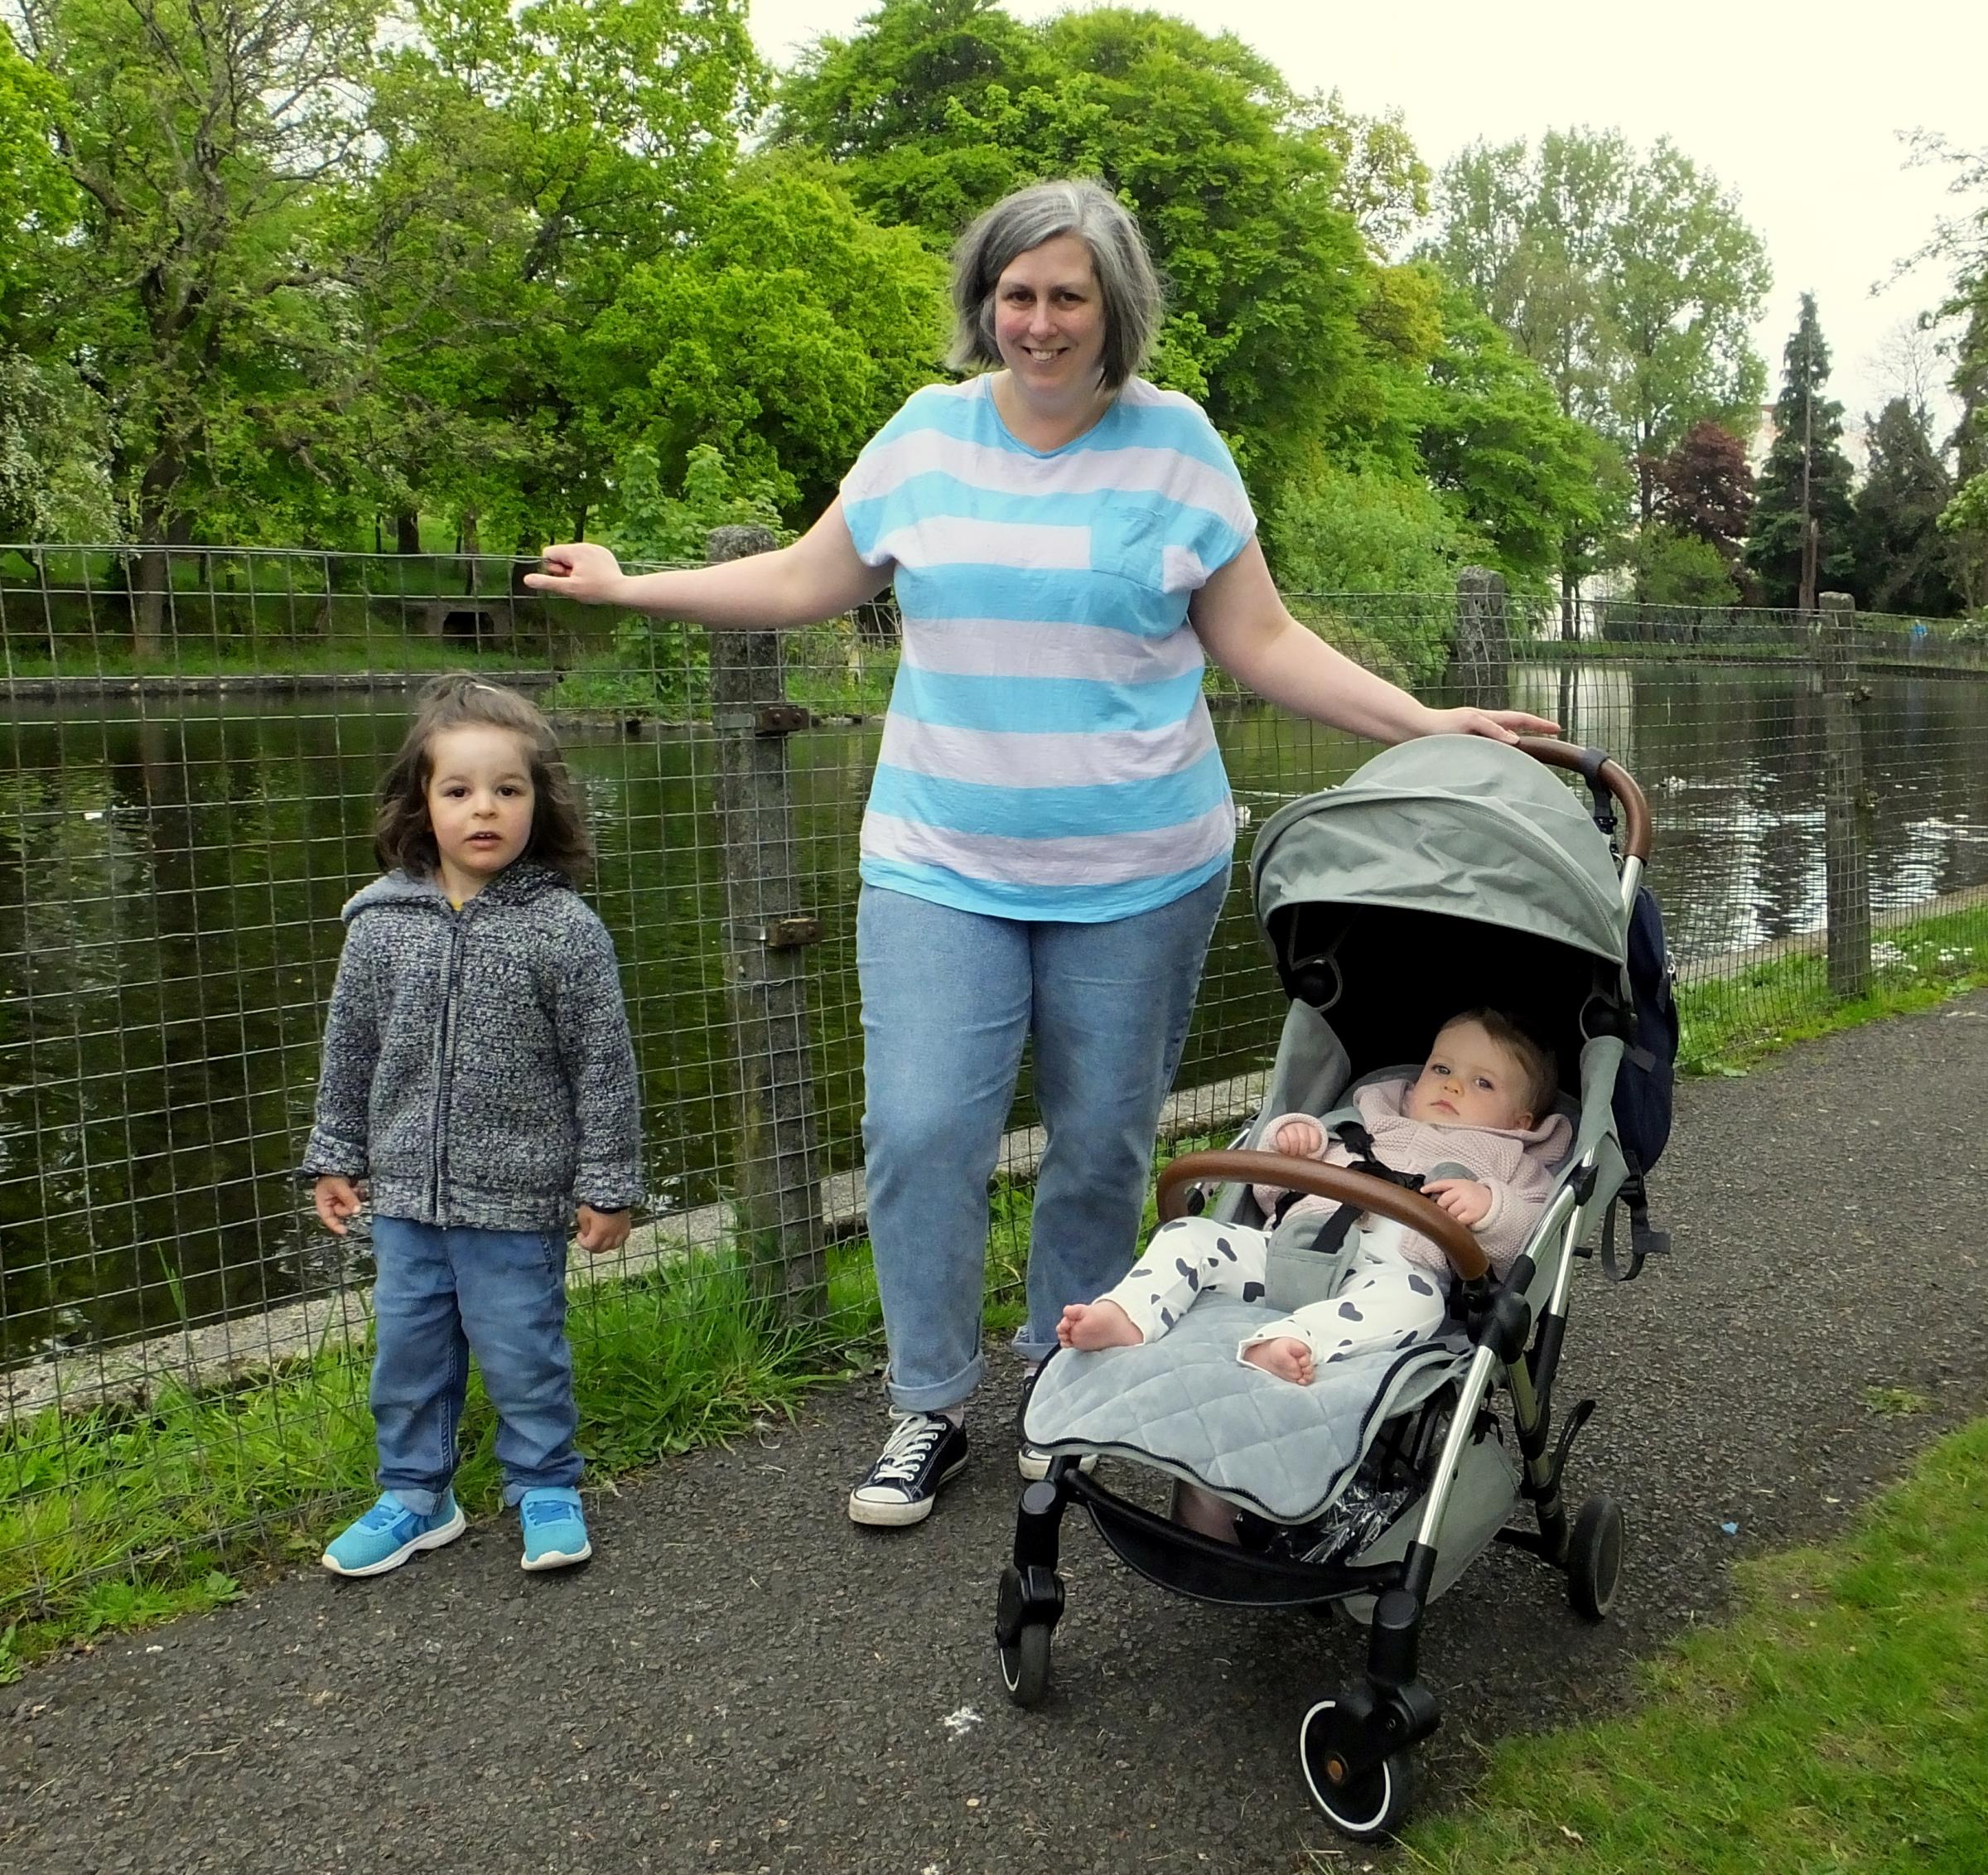 The Bryceland family at Dalmuir Park on May 29, 2021